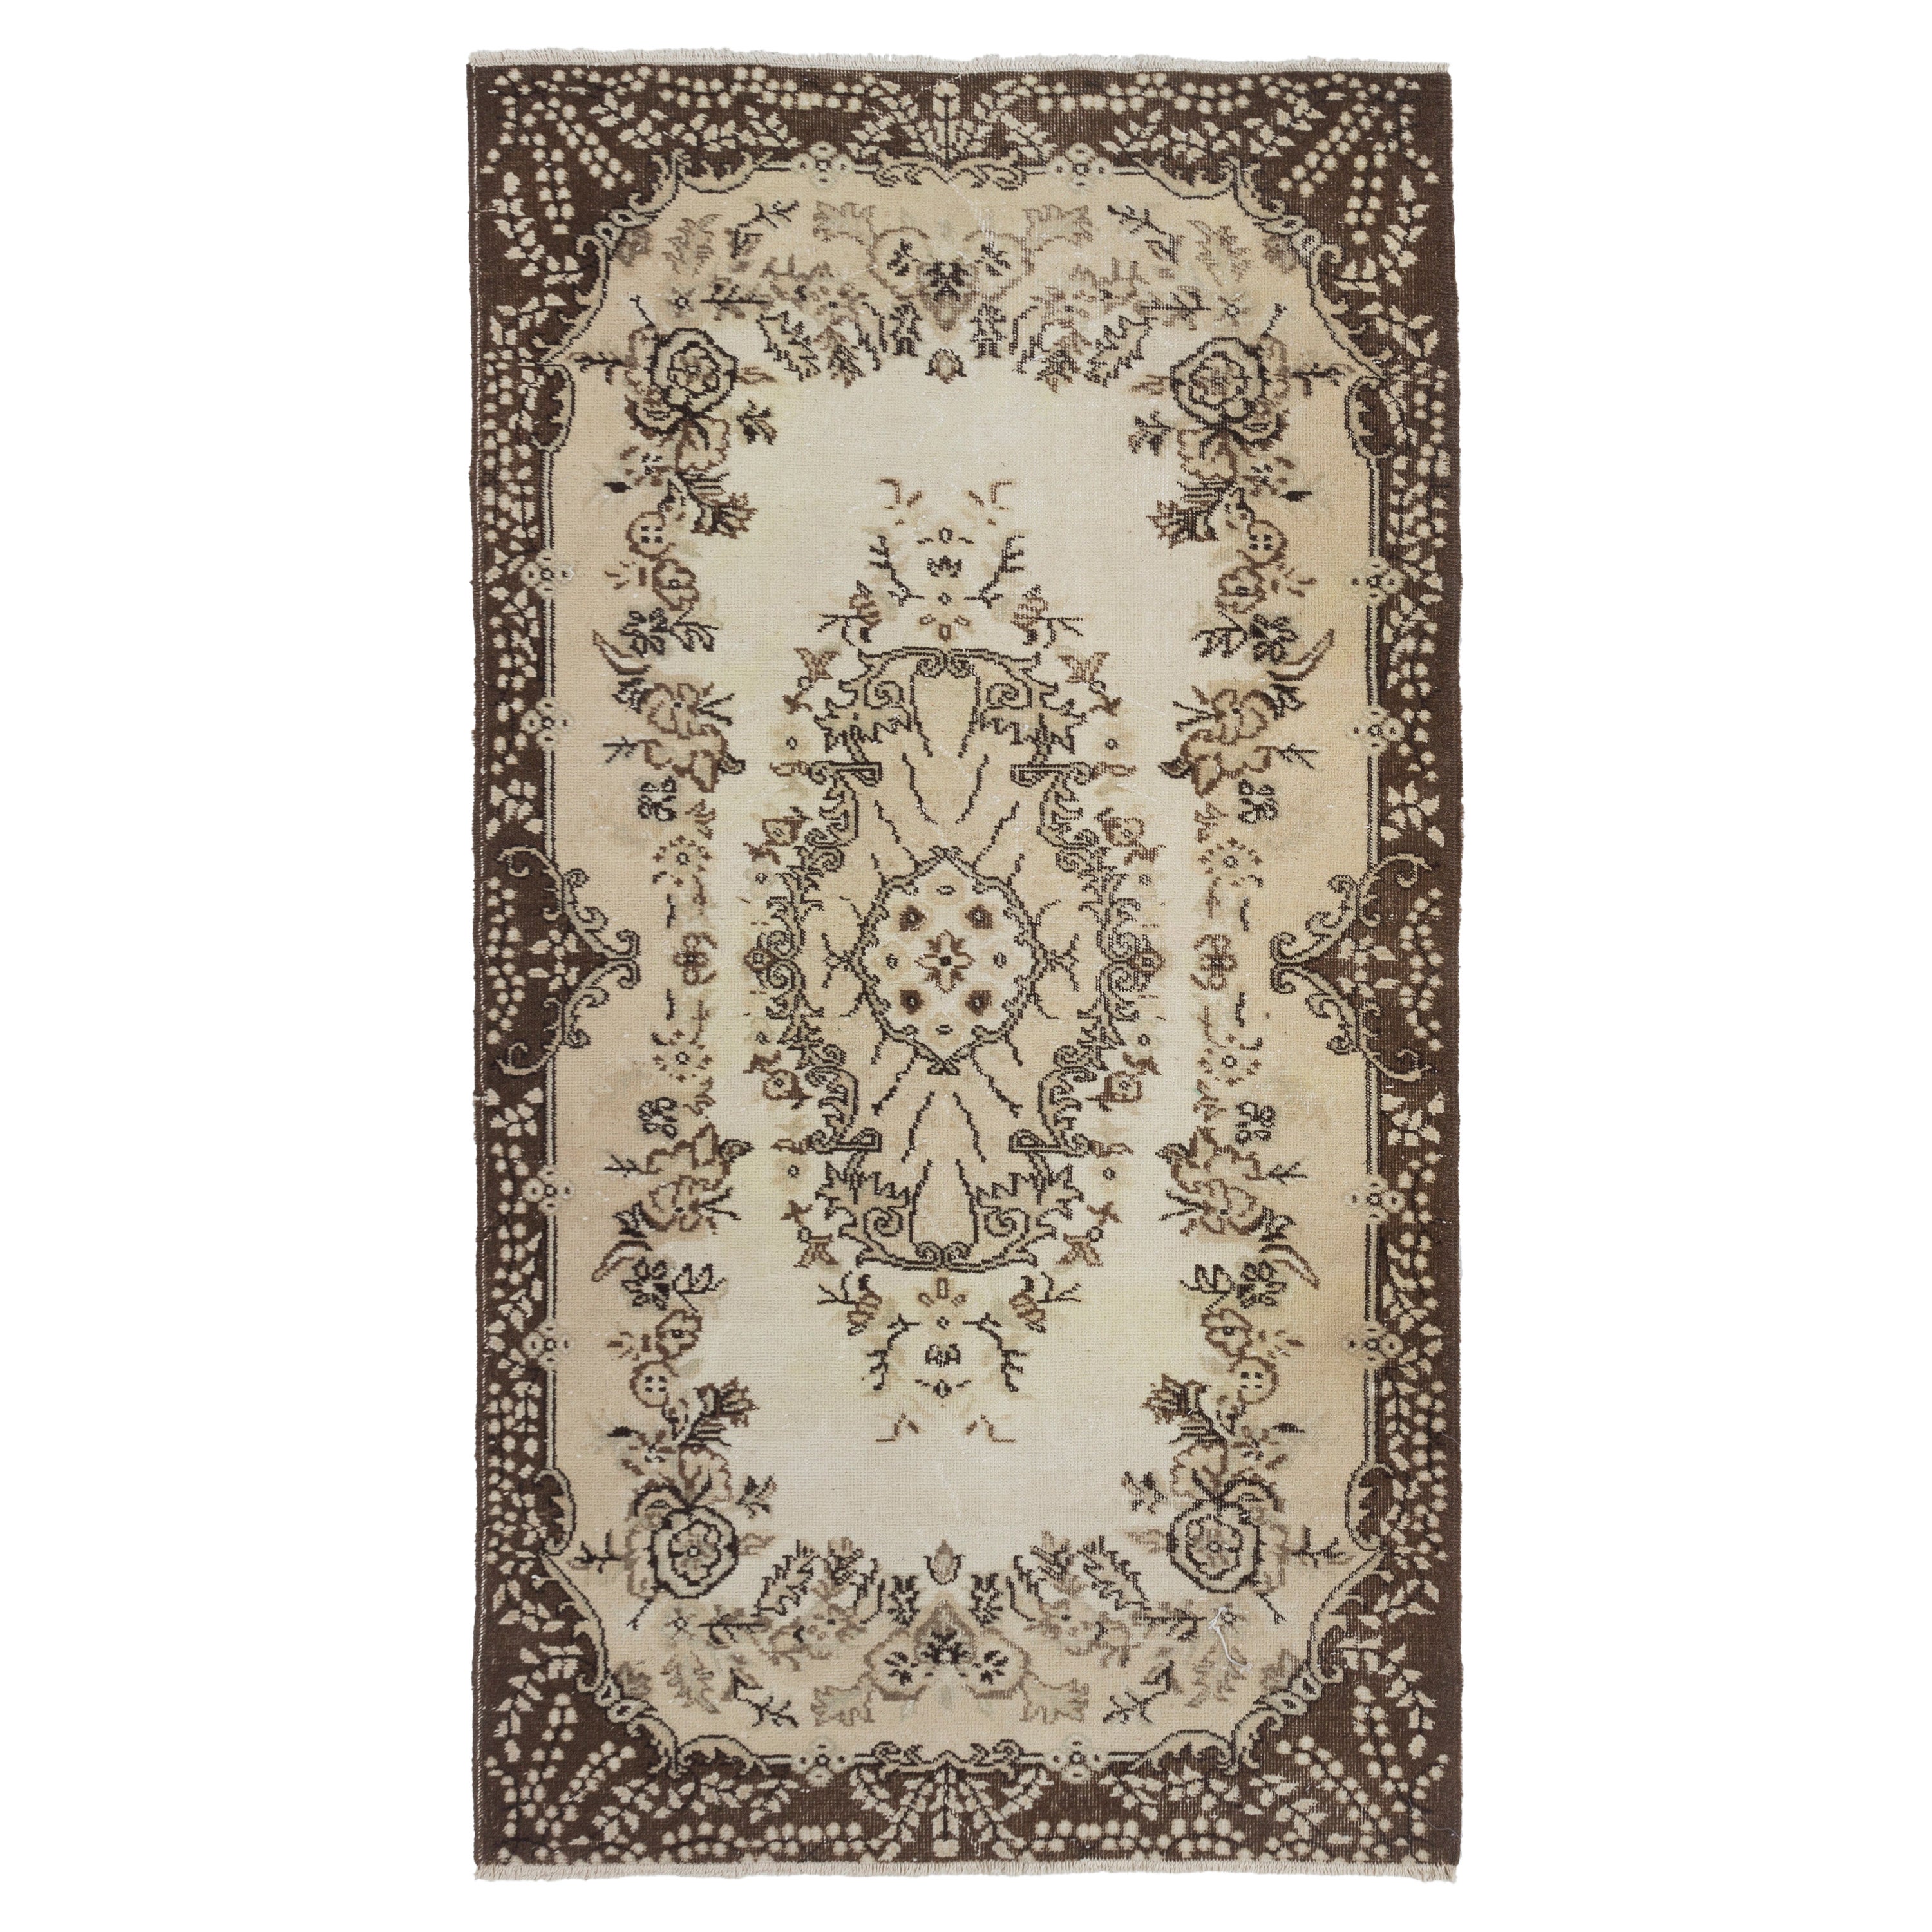 Decorative Hand-Knotted Vintage Anatolian Wool Rug with Medallion Design